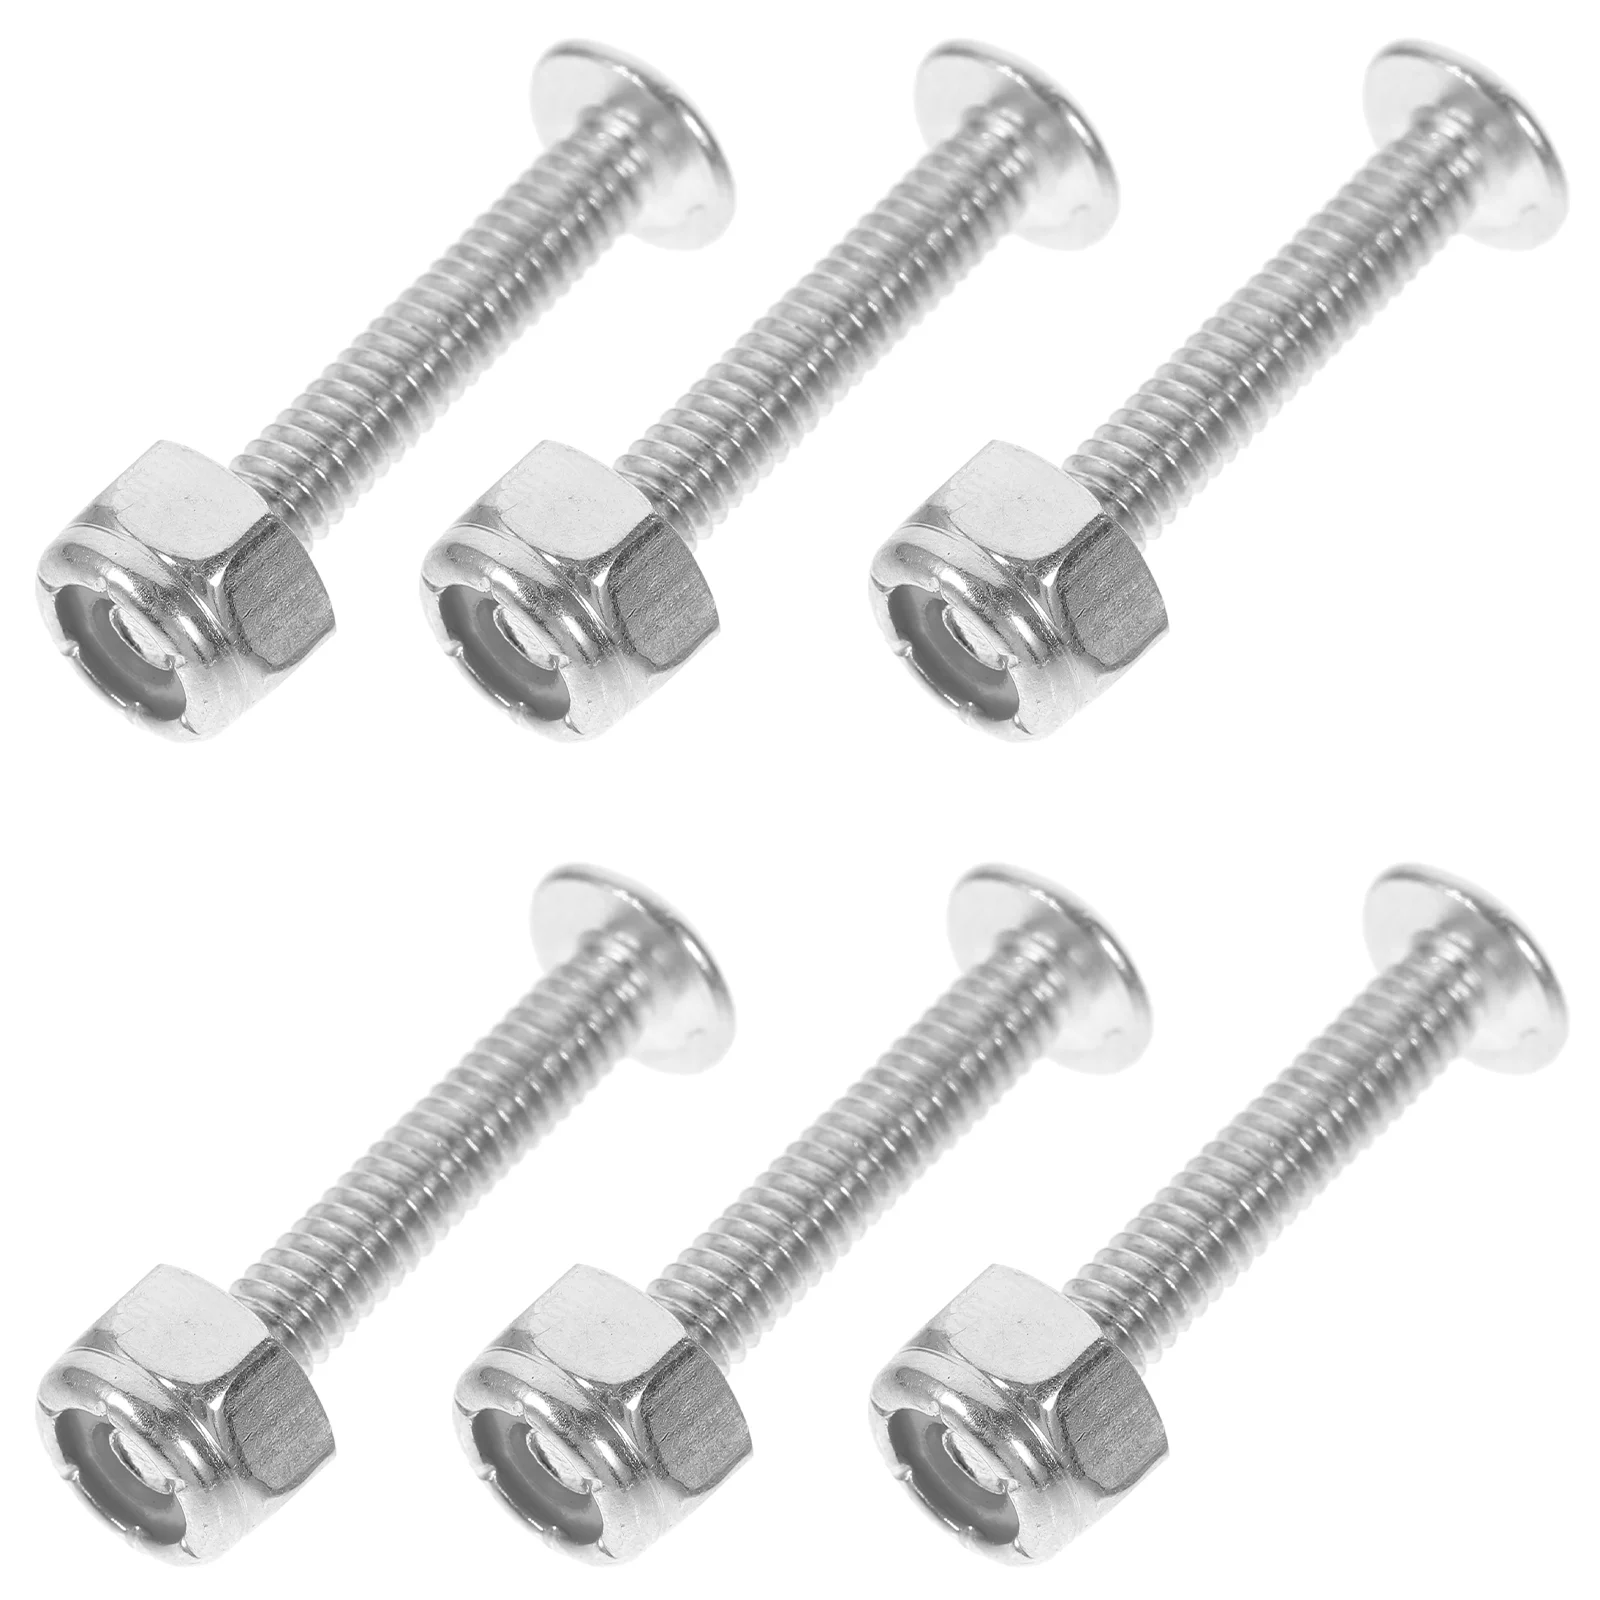 mounting screws 1 set anchor fitting fixing kit for toilet foot plastic iron repairment durable and practical 12 Pcs Practical Foosball Table Screws Component Table Football Screws Gaming Galvanized Iron Foosball Replacement Parts